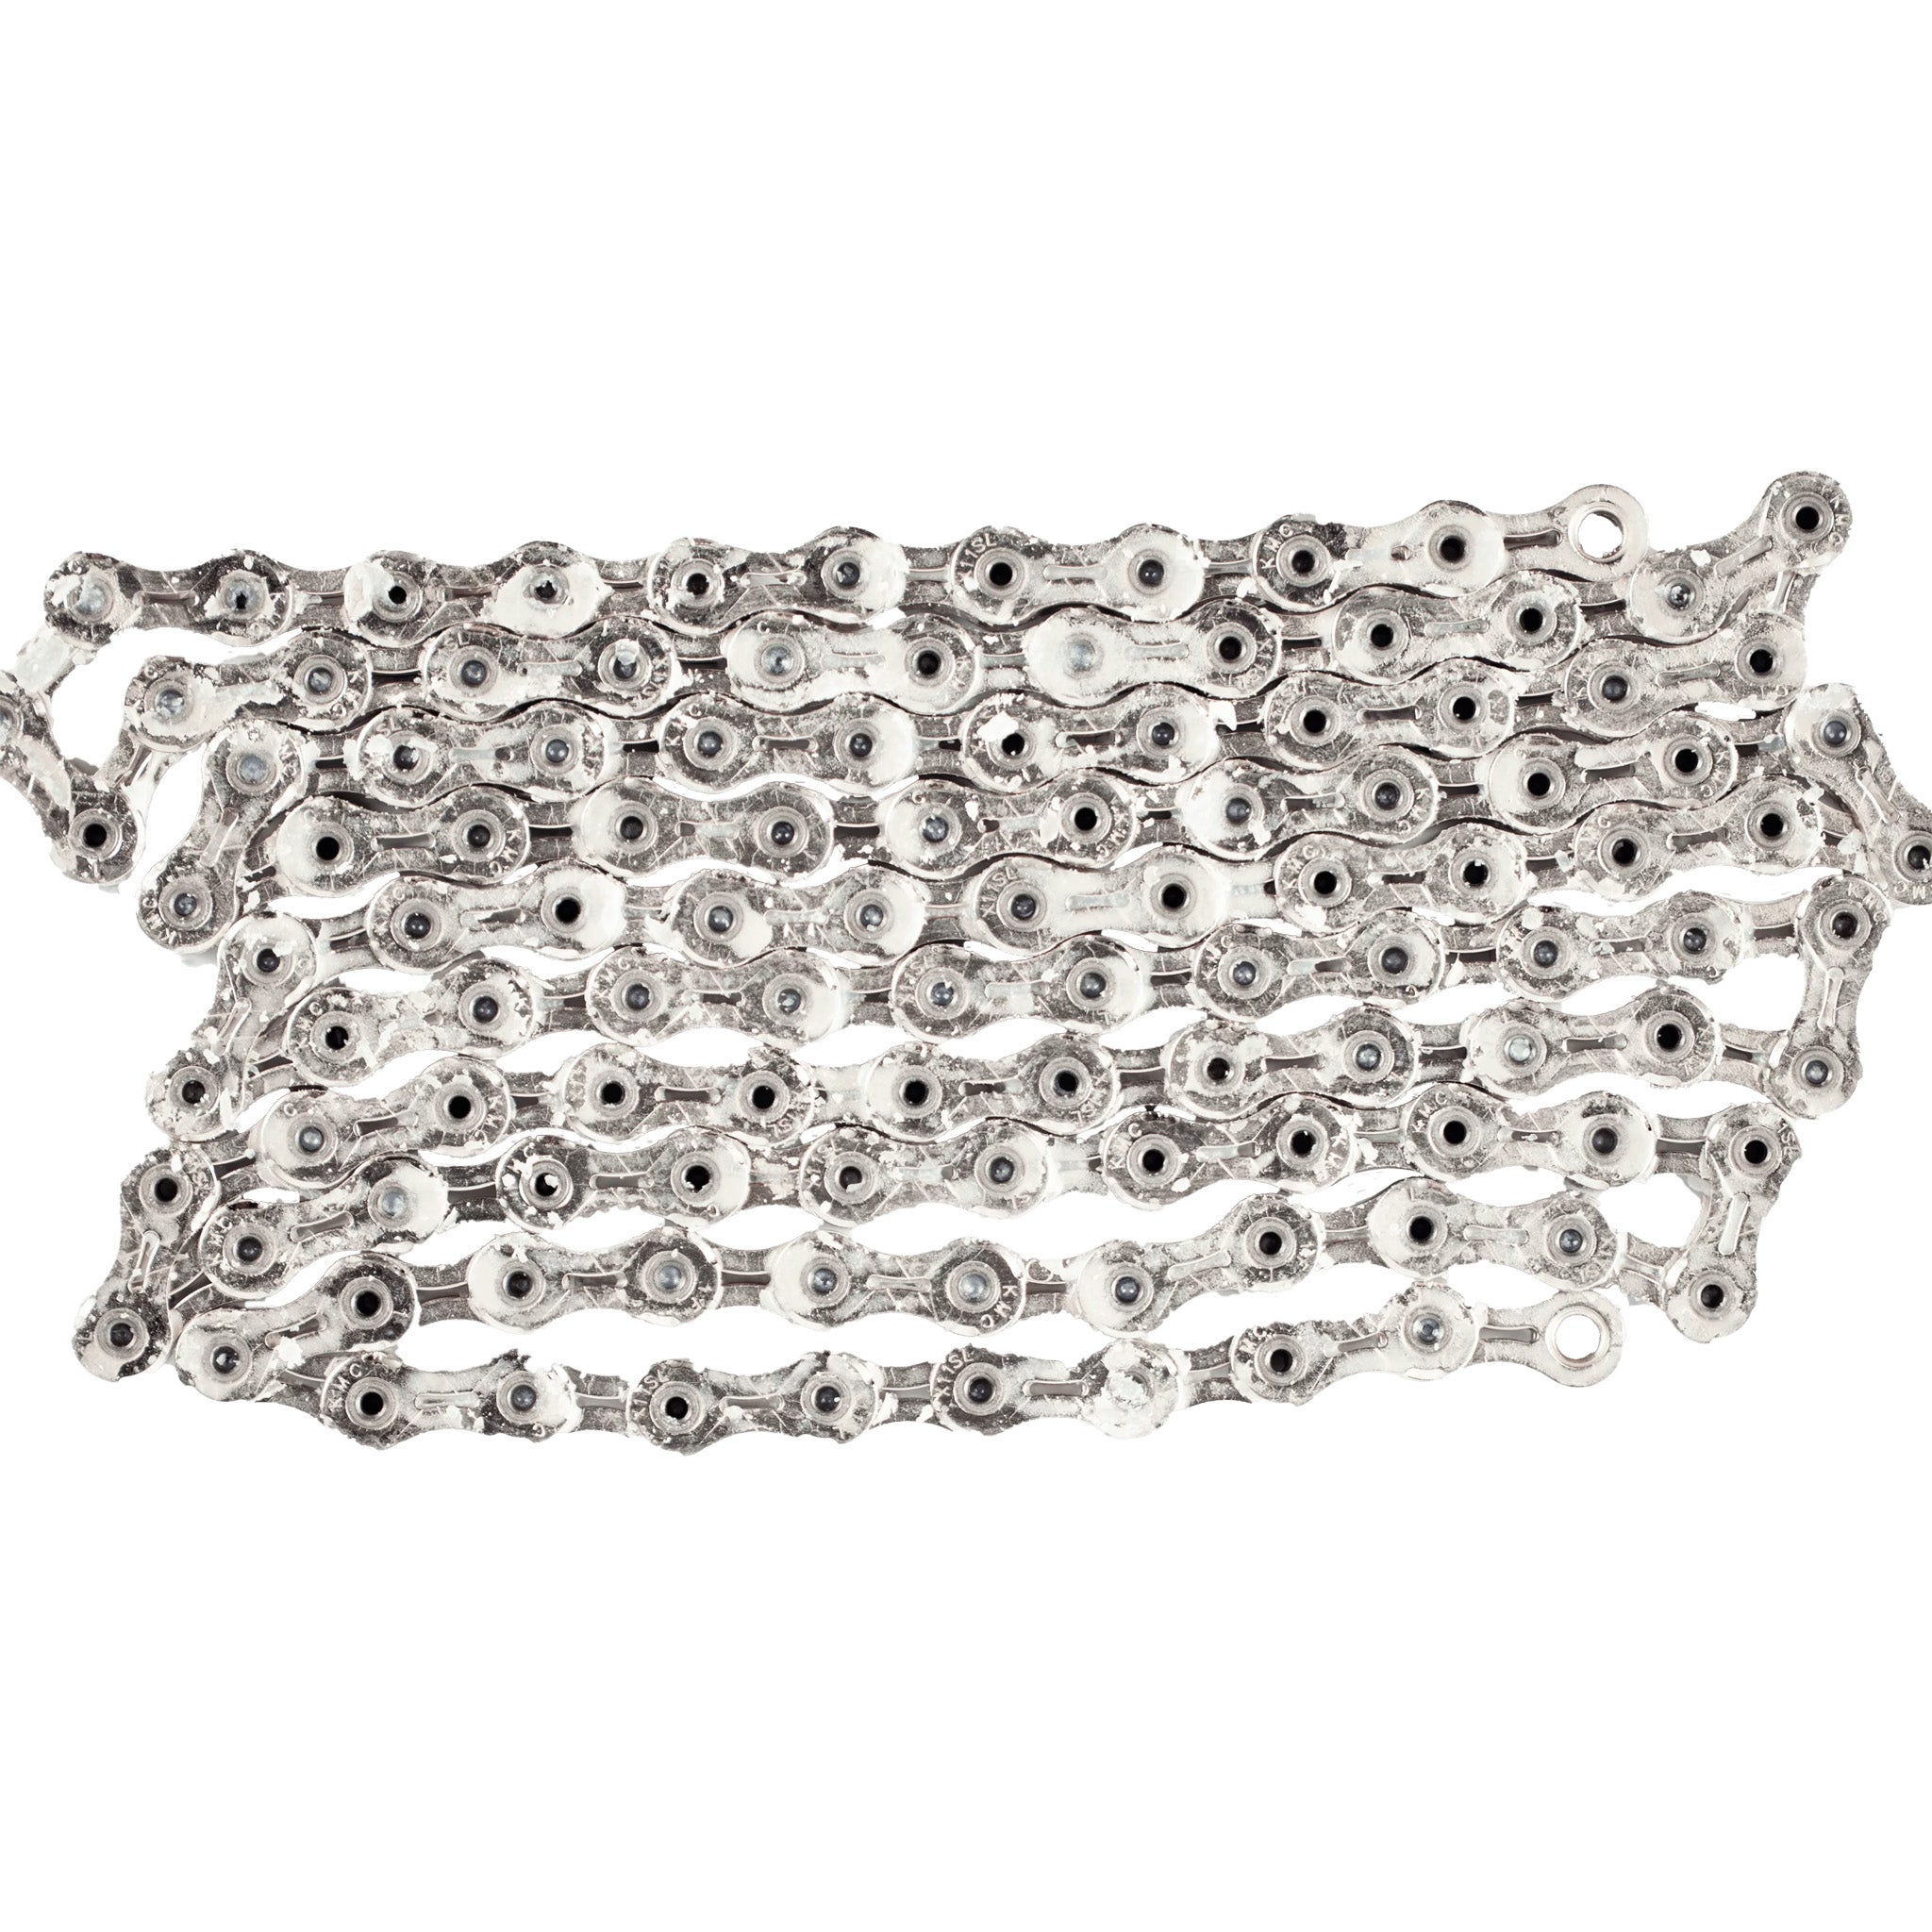 CeramicSpeed UFO Chain - Optimized KMC 11-Speed Compatibility 116 Links Silver